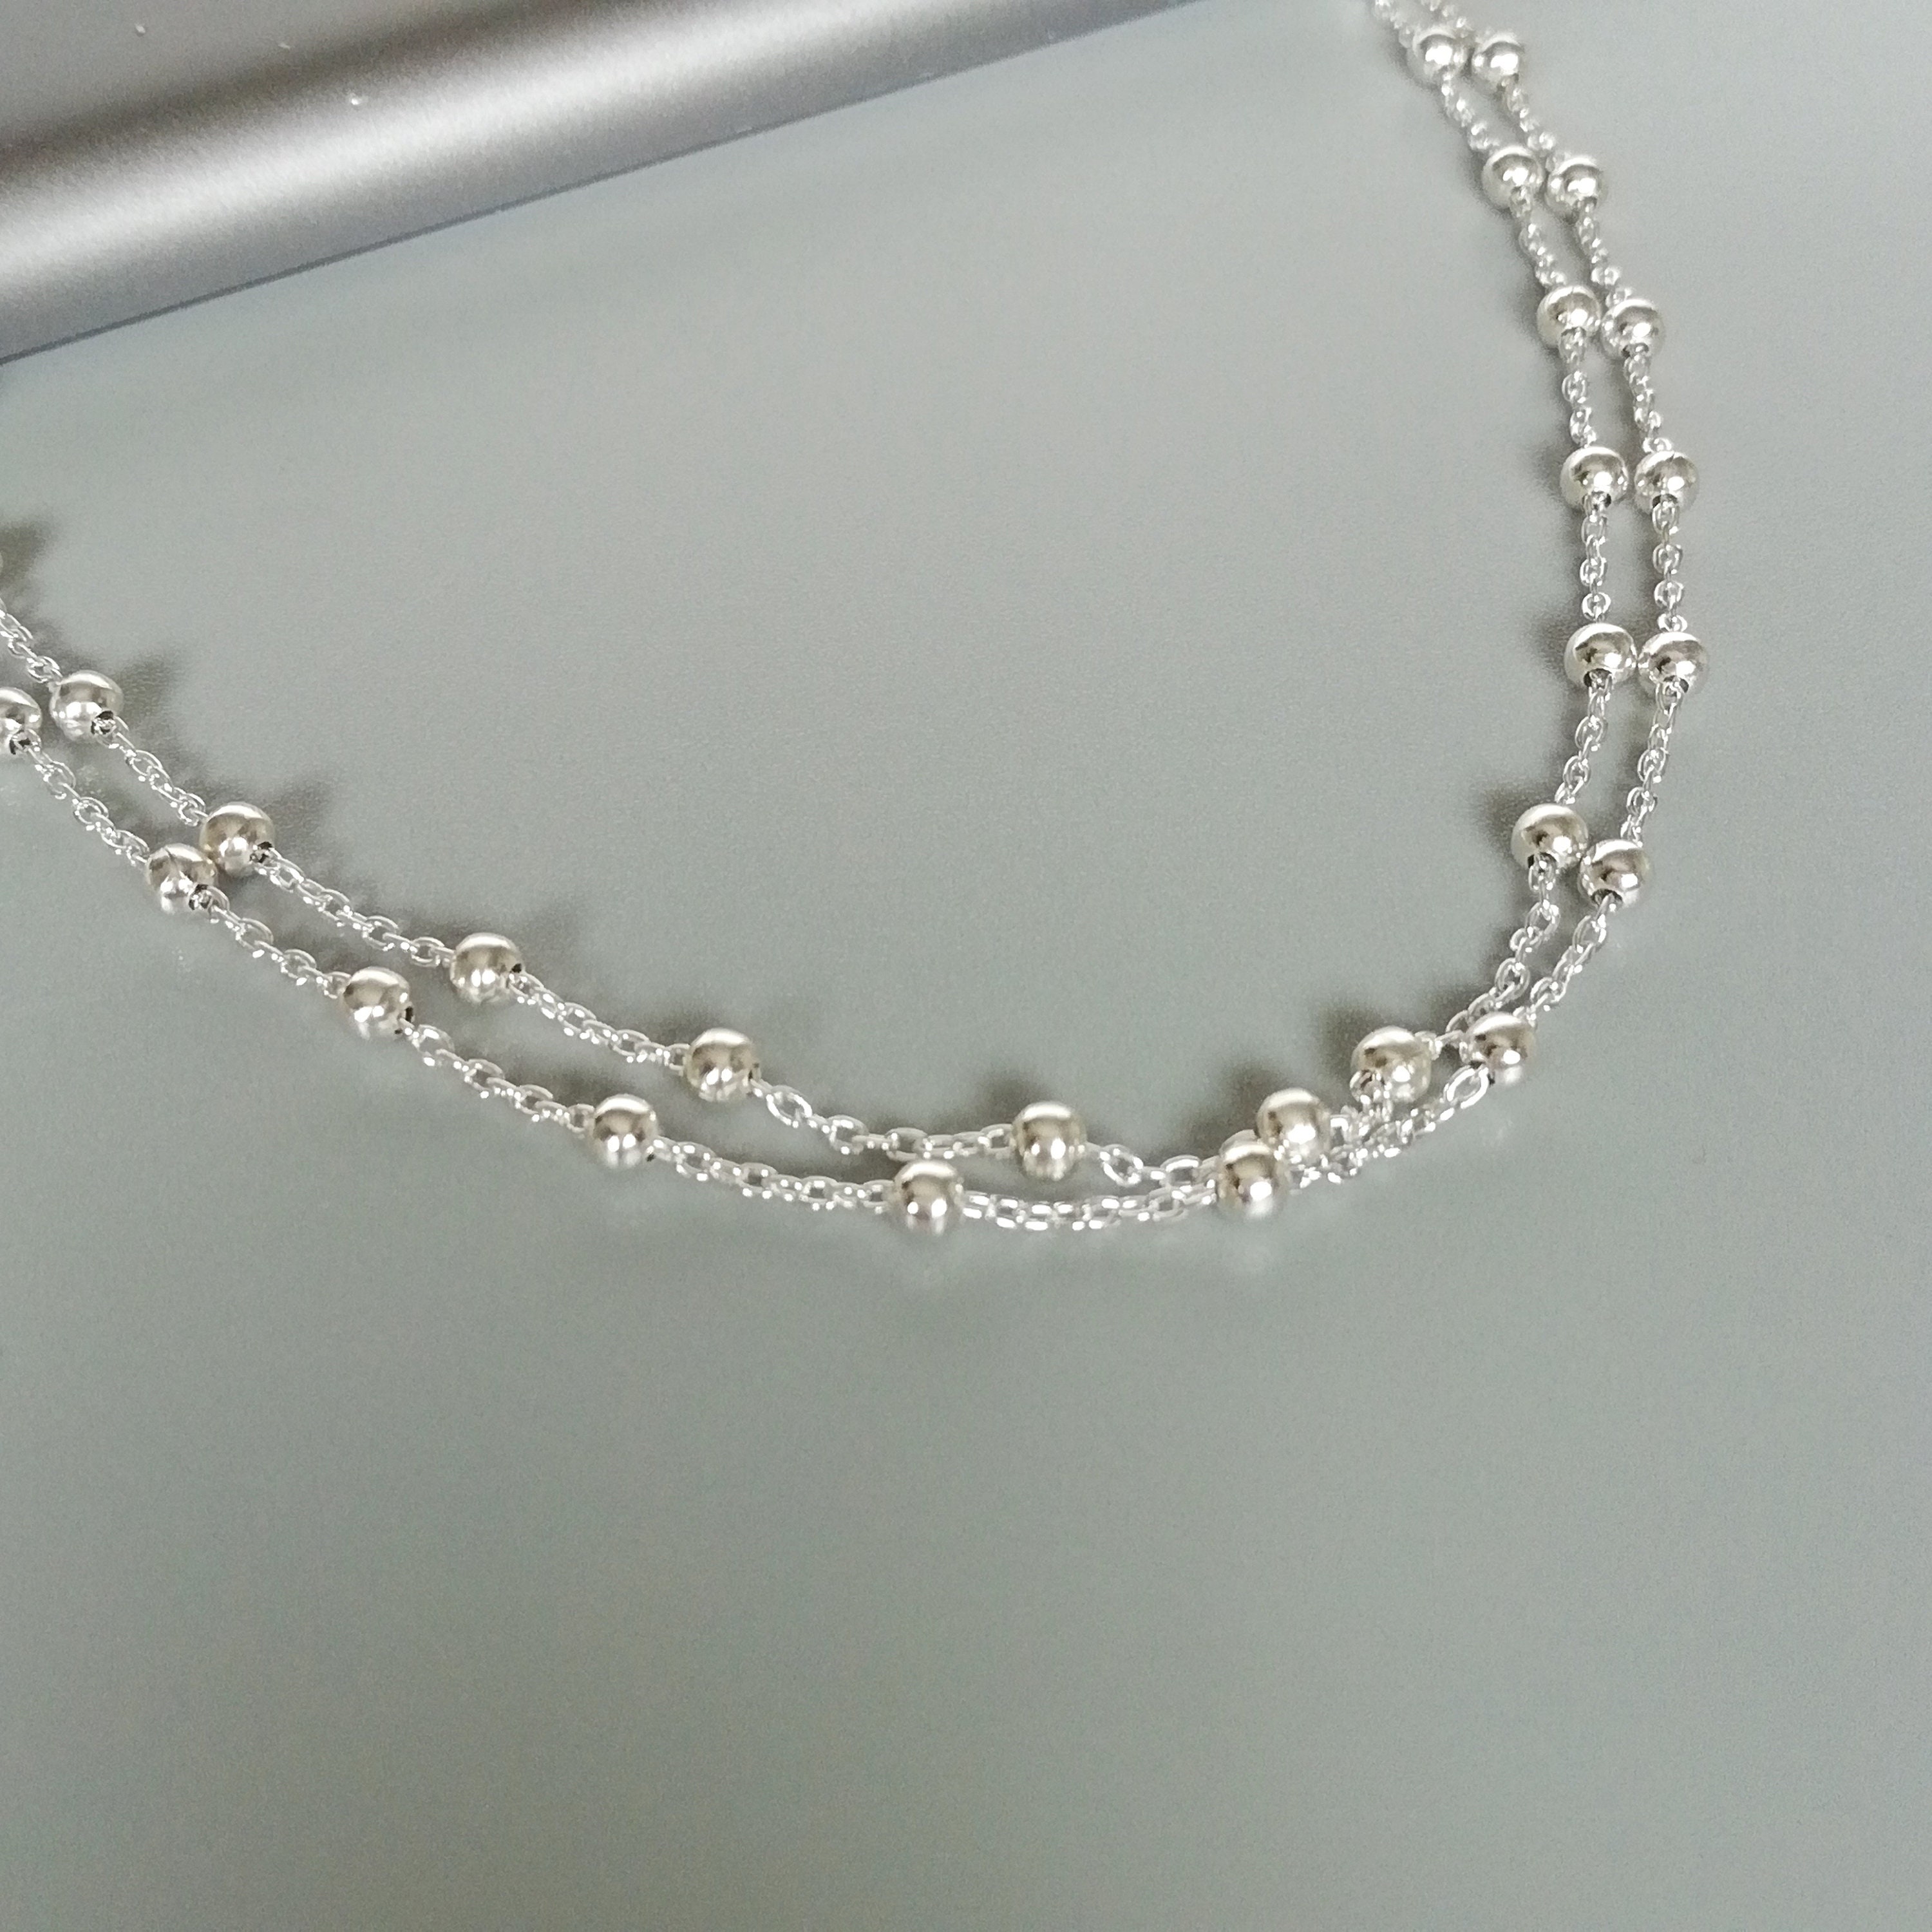 Silver balls chain anklet Double string anklet Silver | Etsy